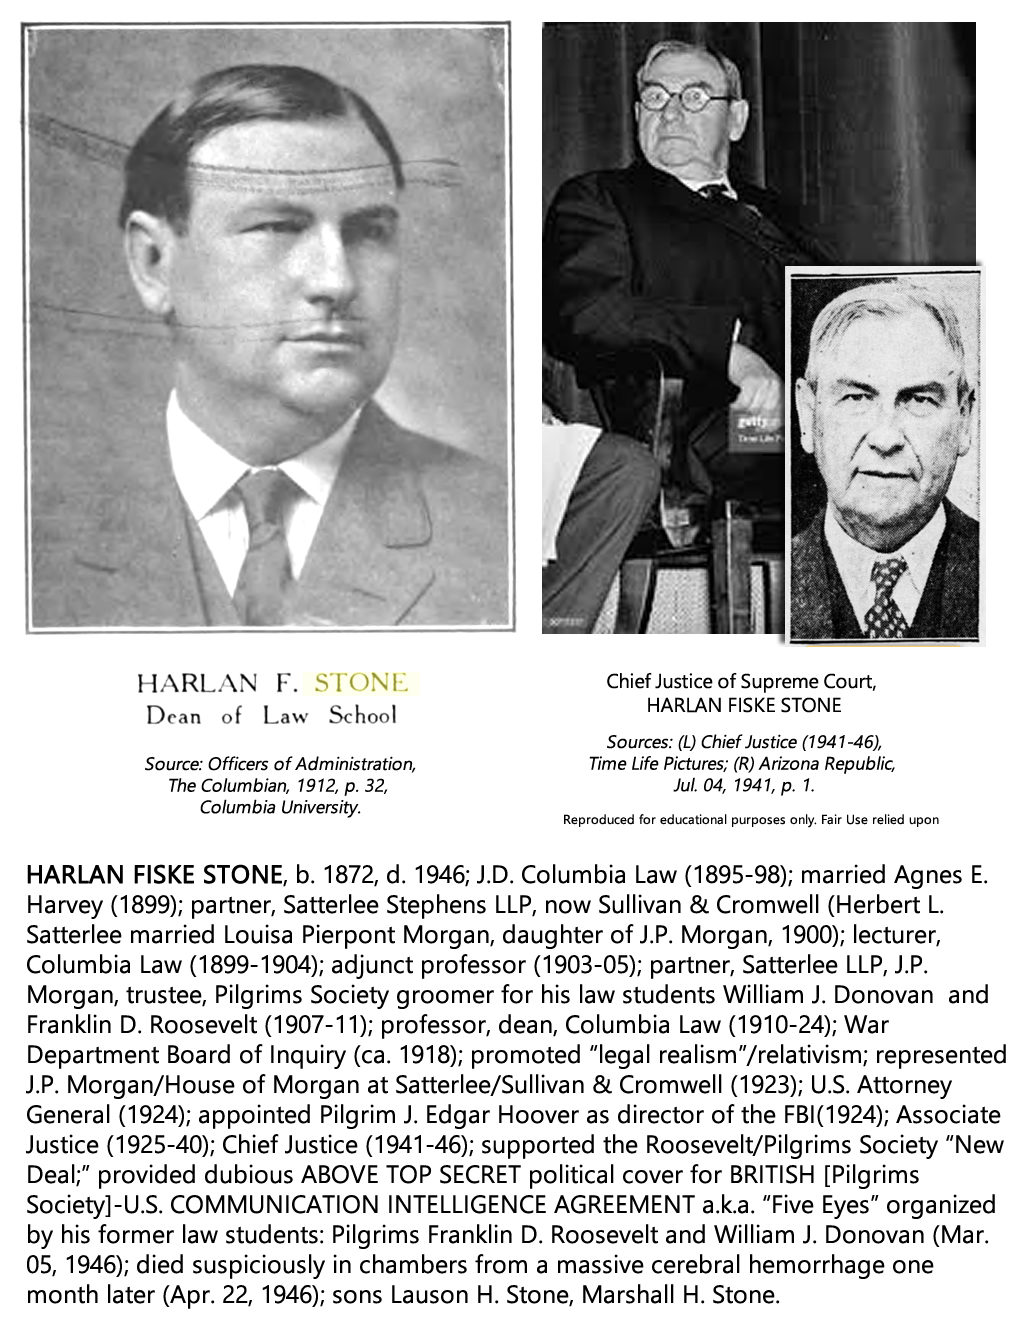 HARLAN FISKE STONE, b. 1872, d. 1946; J.D. Columbia Law (1895-98); married Agnes E. Harvey (1899); partner, Satterlee Stephens LLP, now Sullivan & Cromwell (Herbert L. Satterlee married Louisa Pierpont Morgan, daughter of J.P. Morgan, 1900); lecturer, Columbia Law (1899-1904); adjunct professor (1903-05); partner, Satterlee LLP, J.P. Morgan, trustee, Pilgrims Society groomer for his law students William J. Donovan and Franklin D. Roosevelt (1907-11); professor, dean, Columbia Law (1910-24); War Department Board of Inquiry (ca. 1918); promoted “legal realism”/relativism; represented J.P. Morgan/House of Morgan at Satterlee/Sullivan & Cromwell (1923); U.S. Attorney General (1924); appointed Pilgrim J. Edgar Hoover as director of the FBI(1924); Associate Justice (1925-40); Chief Justice (1941-46); supported the Roosevelt/Pilgrims Society “New Deal;” provided dubious ABOVE TOP SECRET political cover for BRITISH [Pilgrims Society]-U.S. COMMUNICATION INTELLIGENCE AGREEMENT a.k.a. “Five Eyes” organized by his former law students: Pilgrims Franklin D. Roosevelt and William J. Donovan (Mar. 05, 1946); died suspiciously in chambers from a massive cerebral hemorrhage one month later (Apr. 22, 1946); sons Lauson H. Stone, Marshall H. Stone.